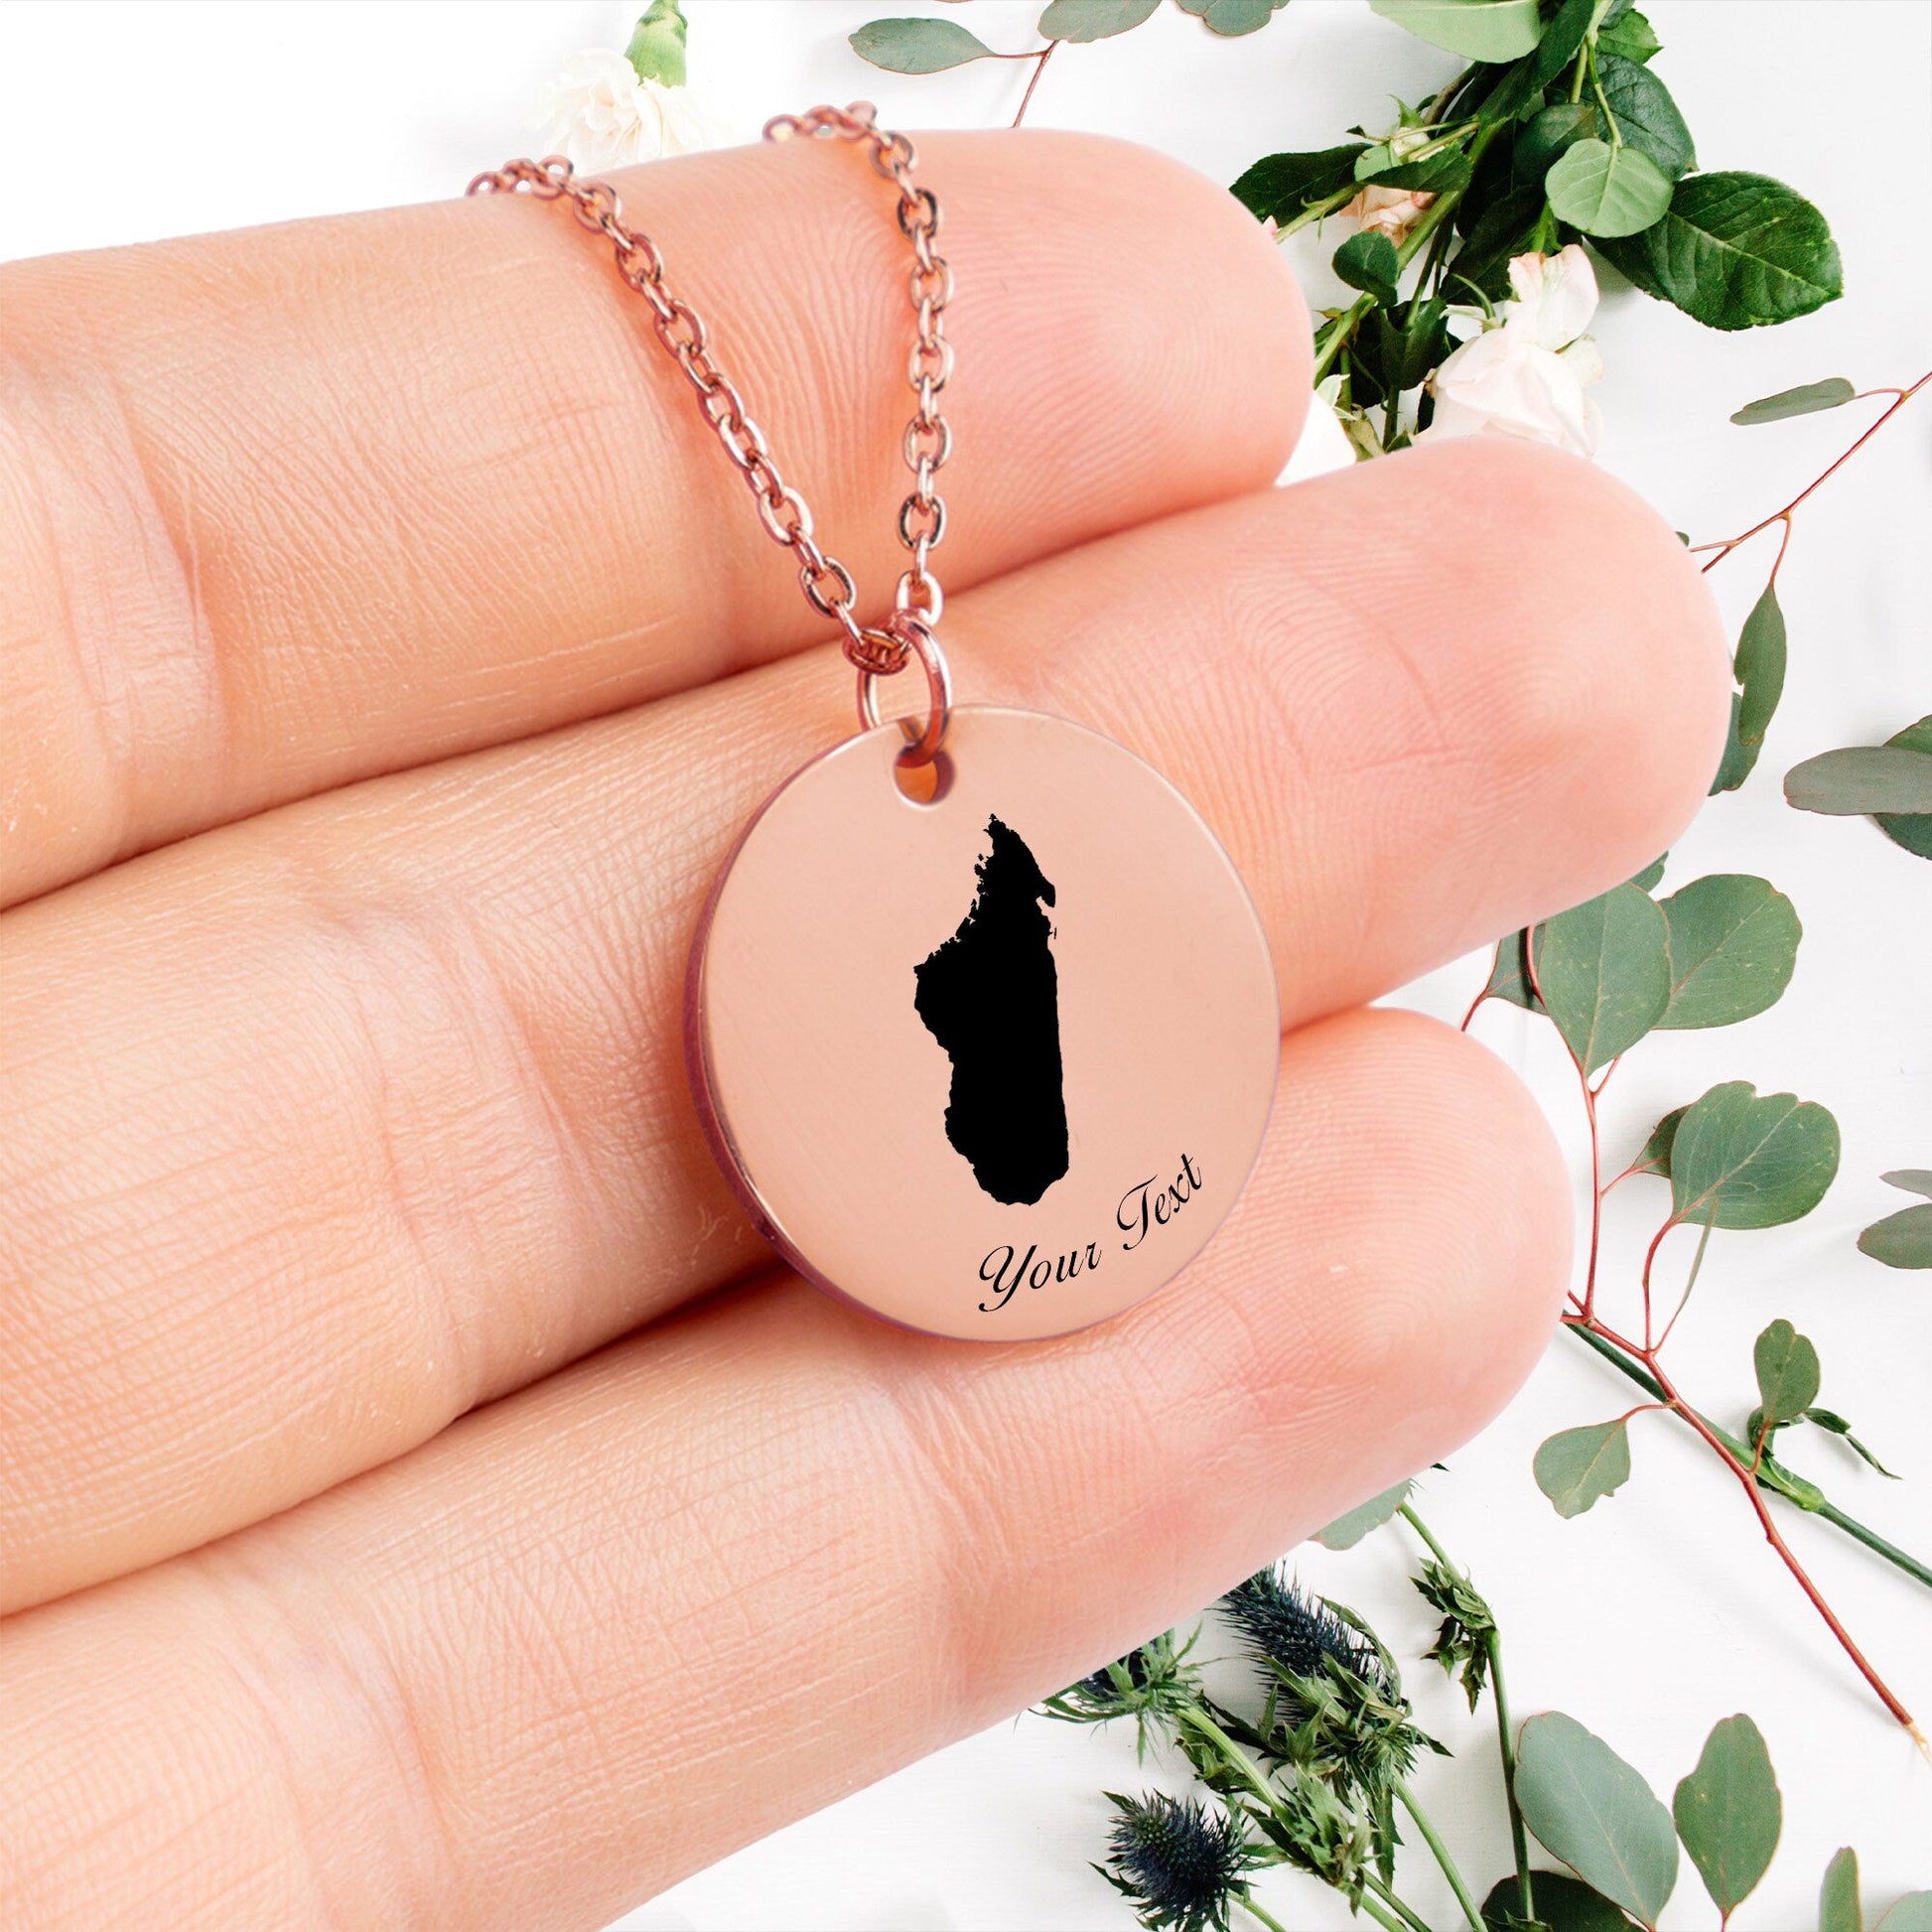 Madagascar Country Map Necklace, Your Name Necklace, Minimalist Necklace, Personalized Gift, Silver Necklace, Gift For Him Her